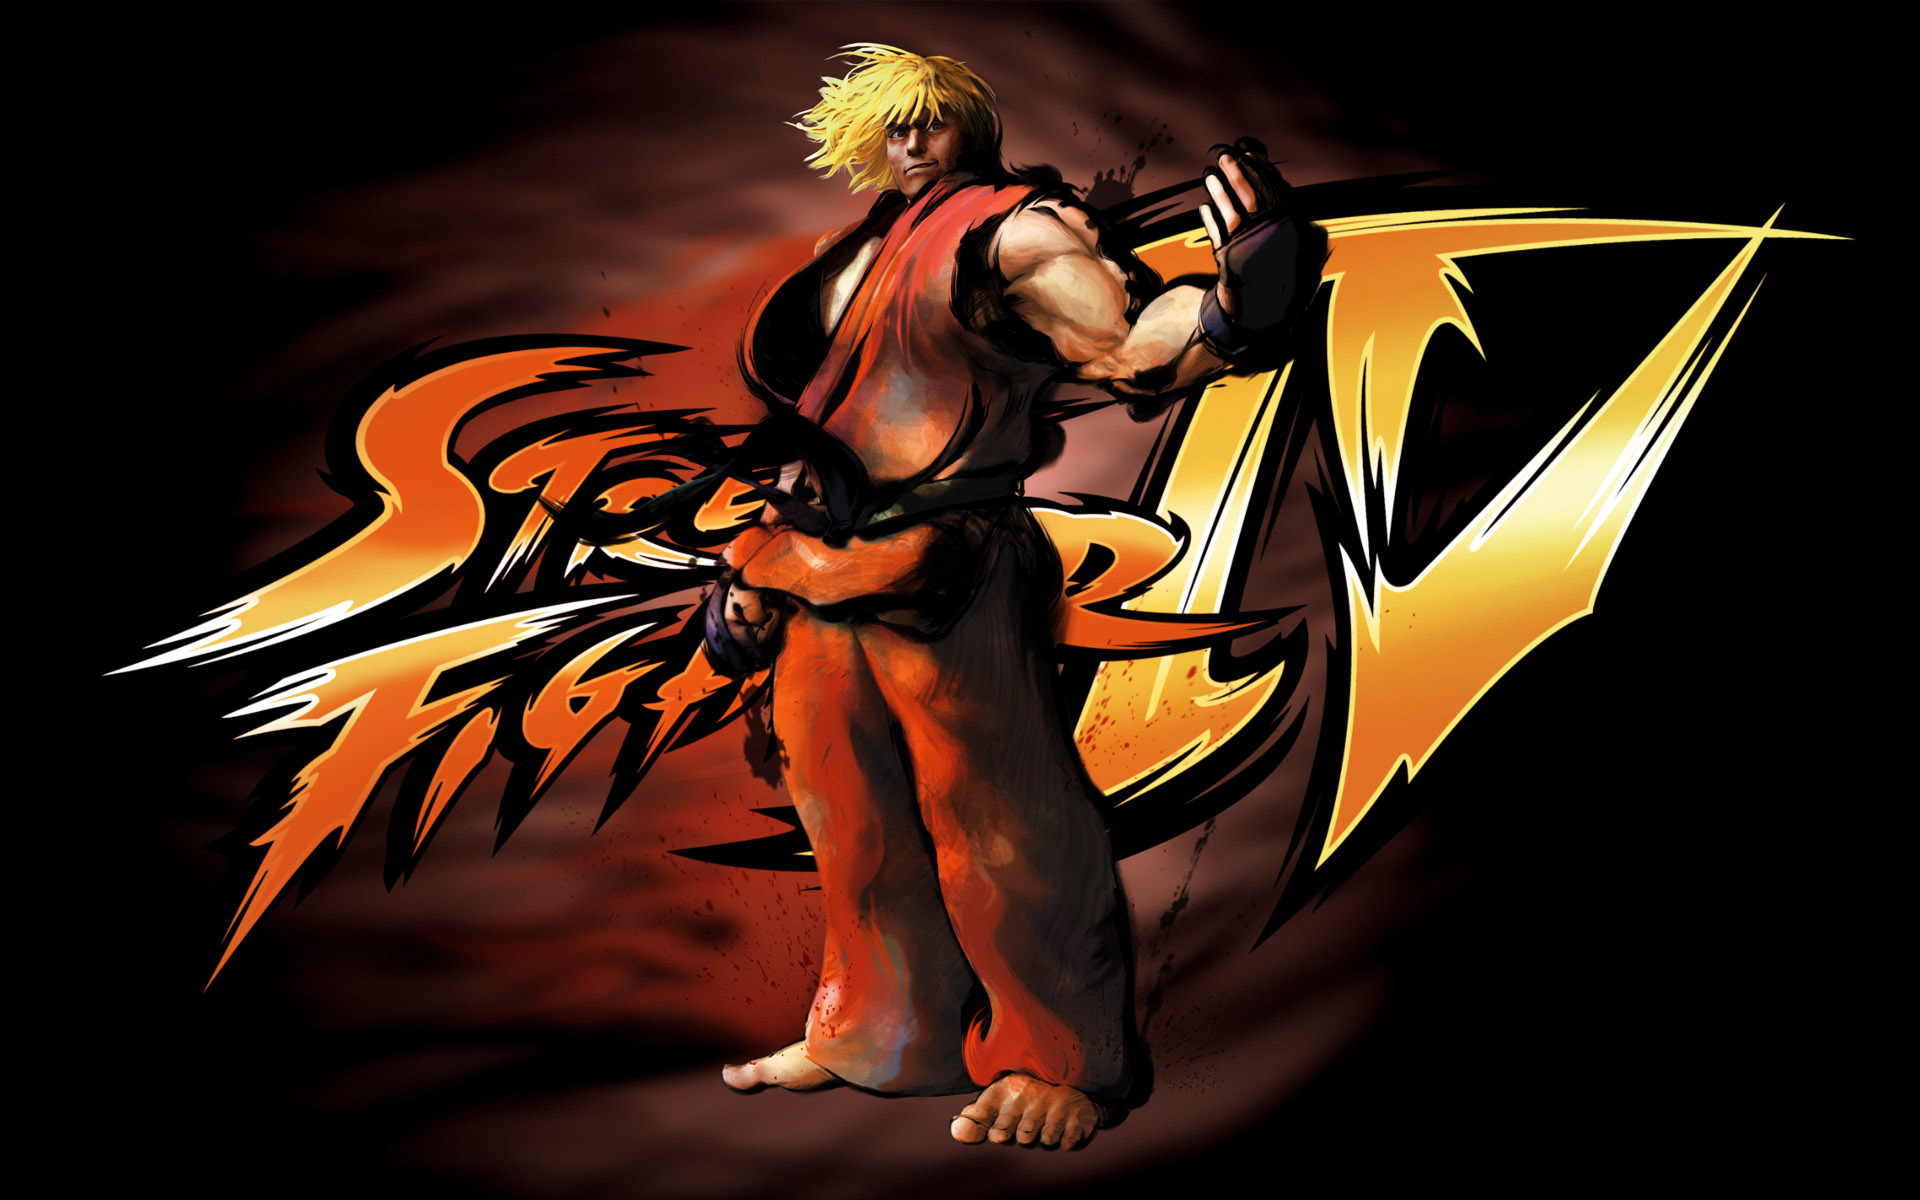 1920x1200 210+ Street Fighter HD Wallpapers and Backgrounds